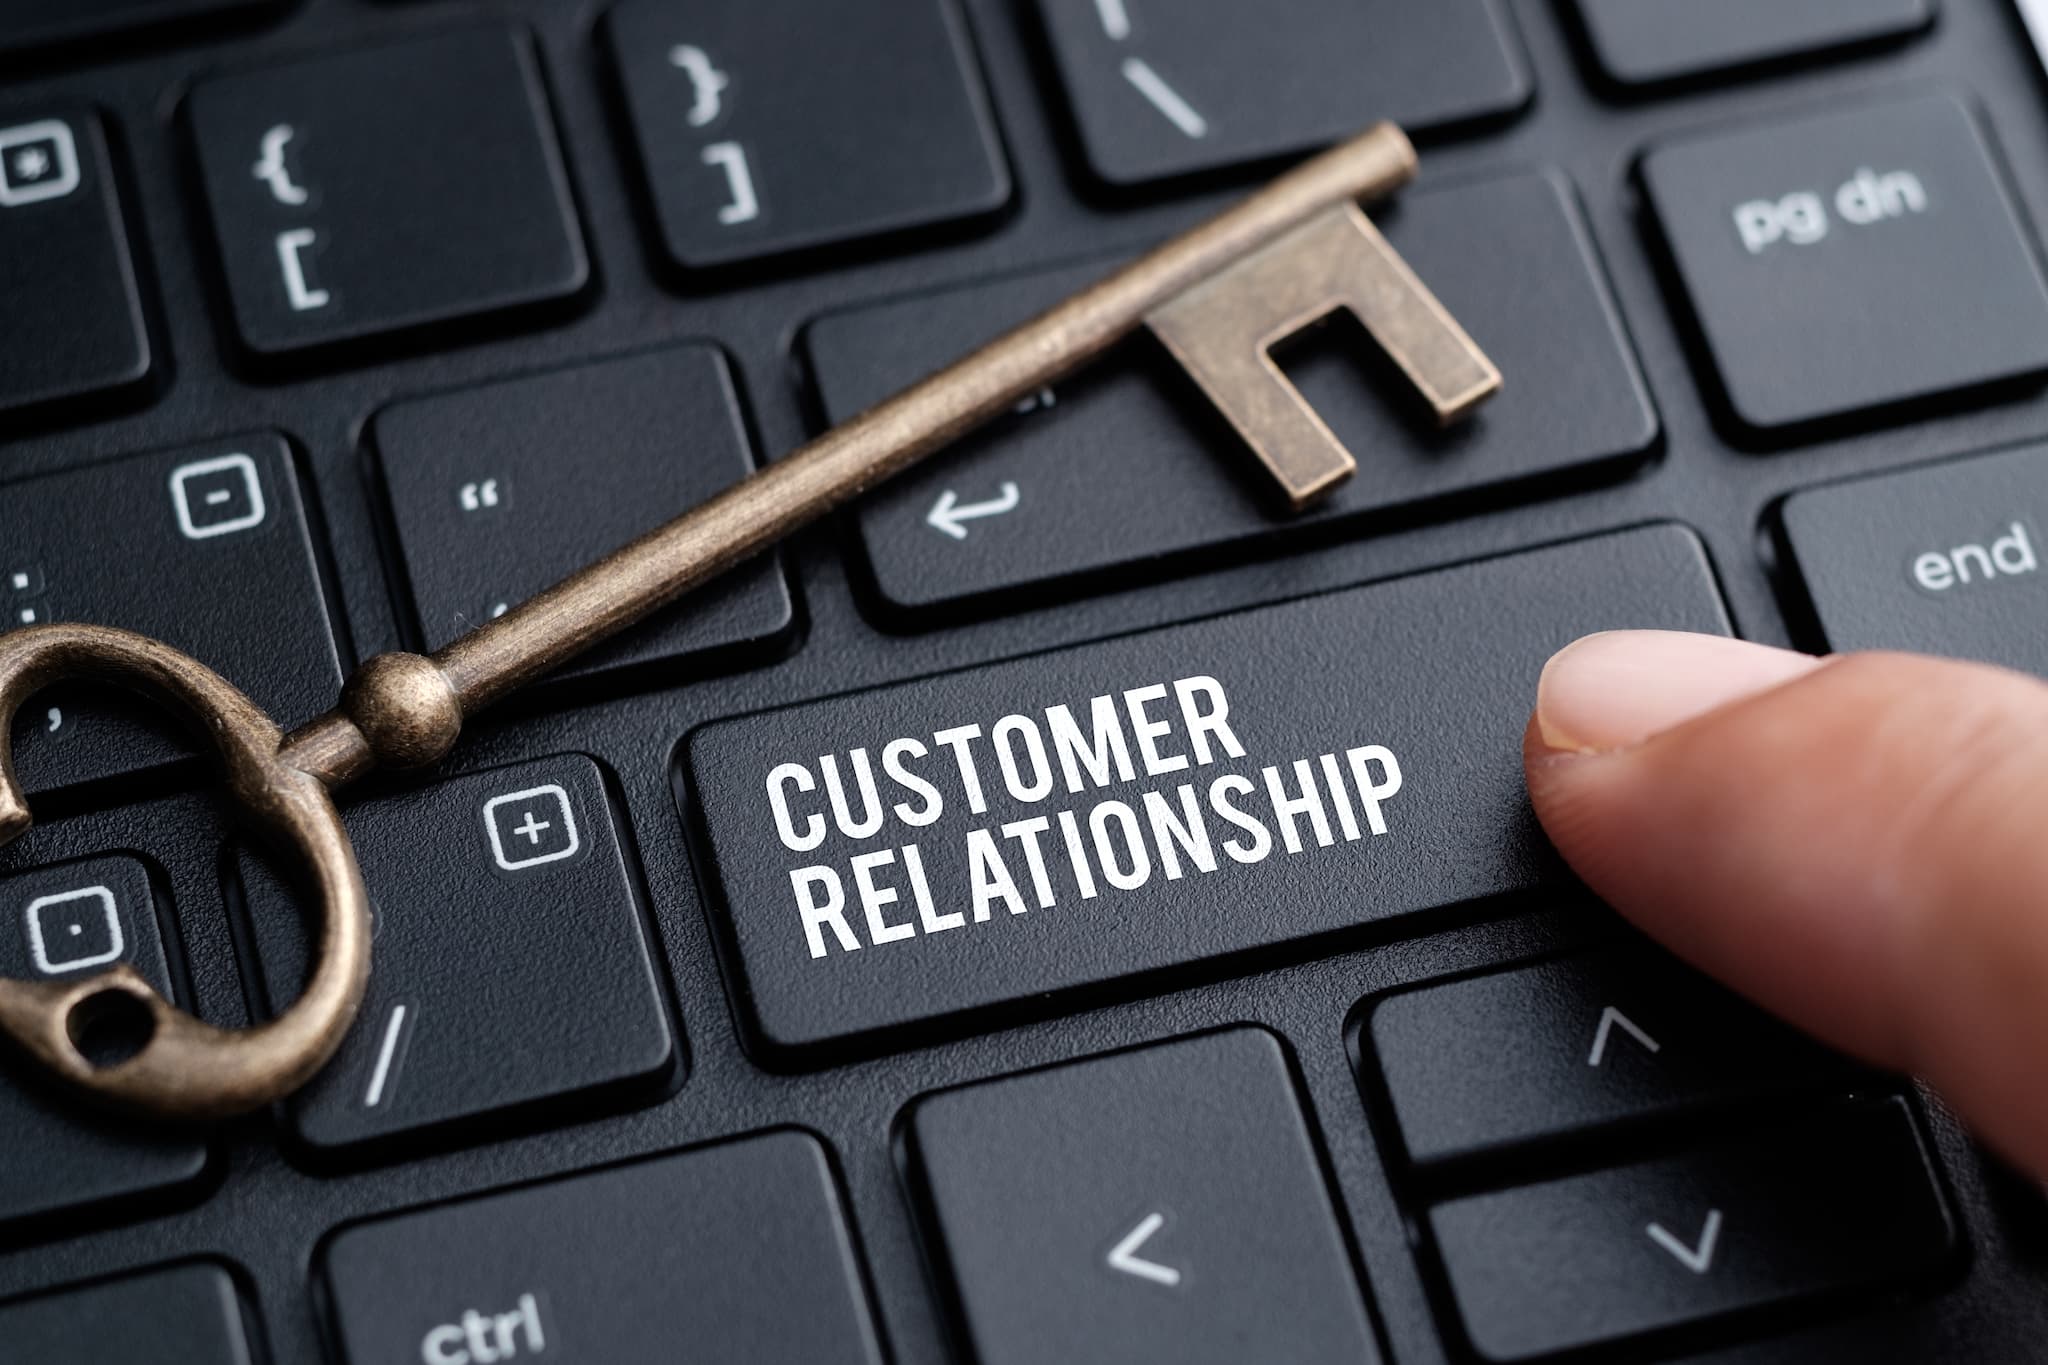 When it comes to customer relationships, how much is enough?